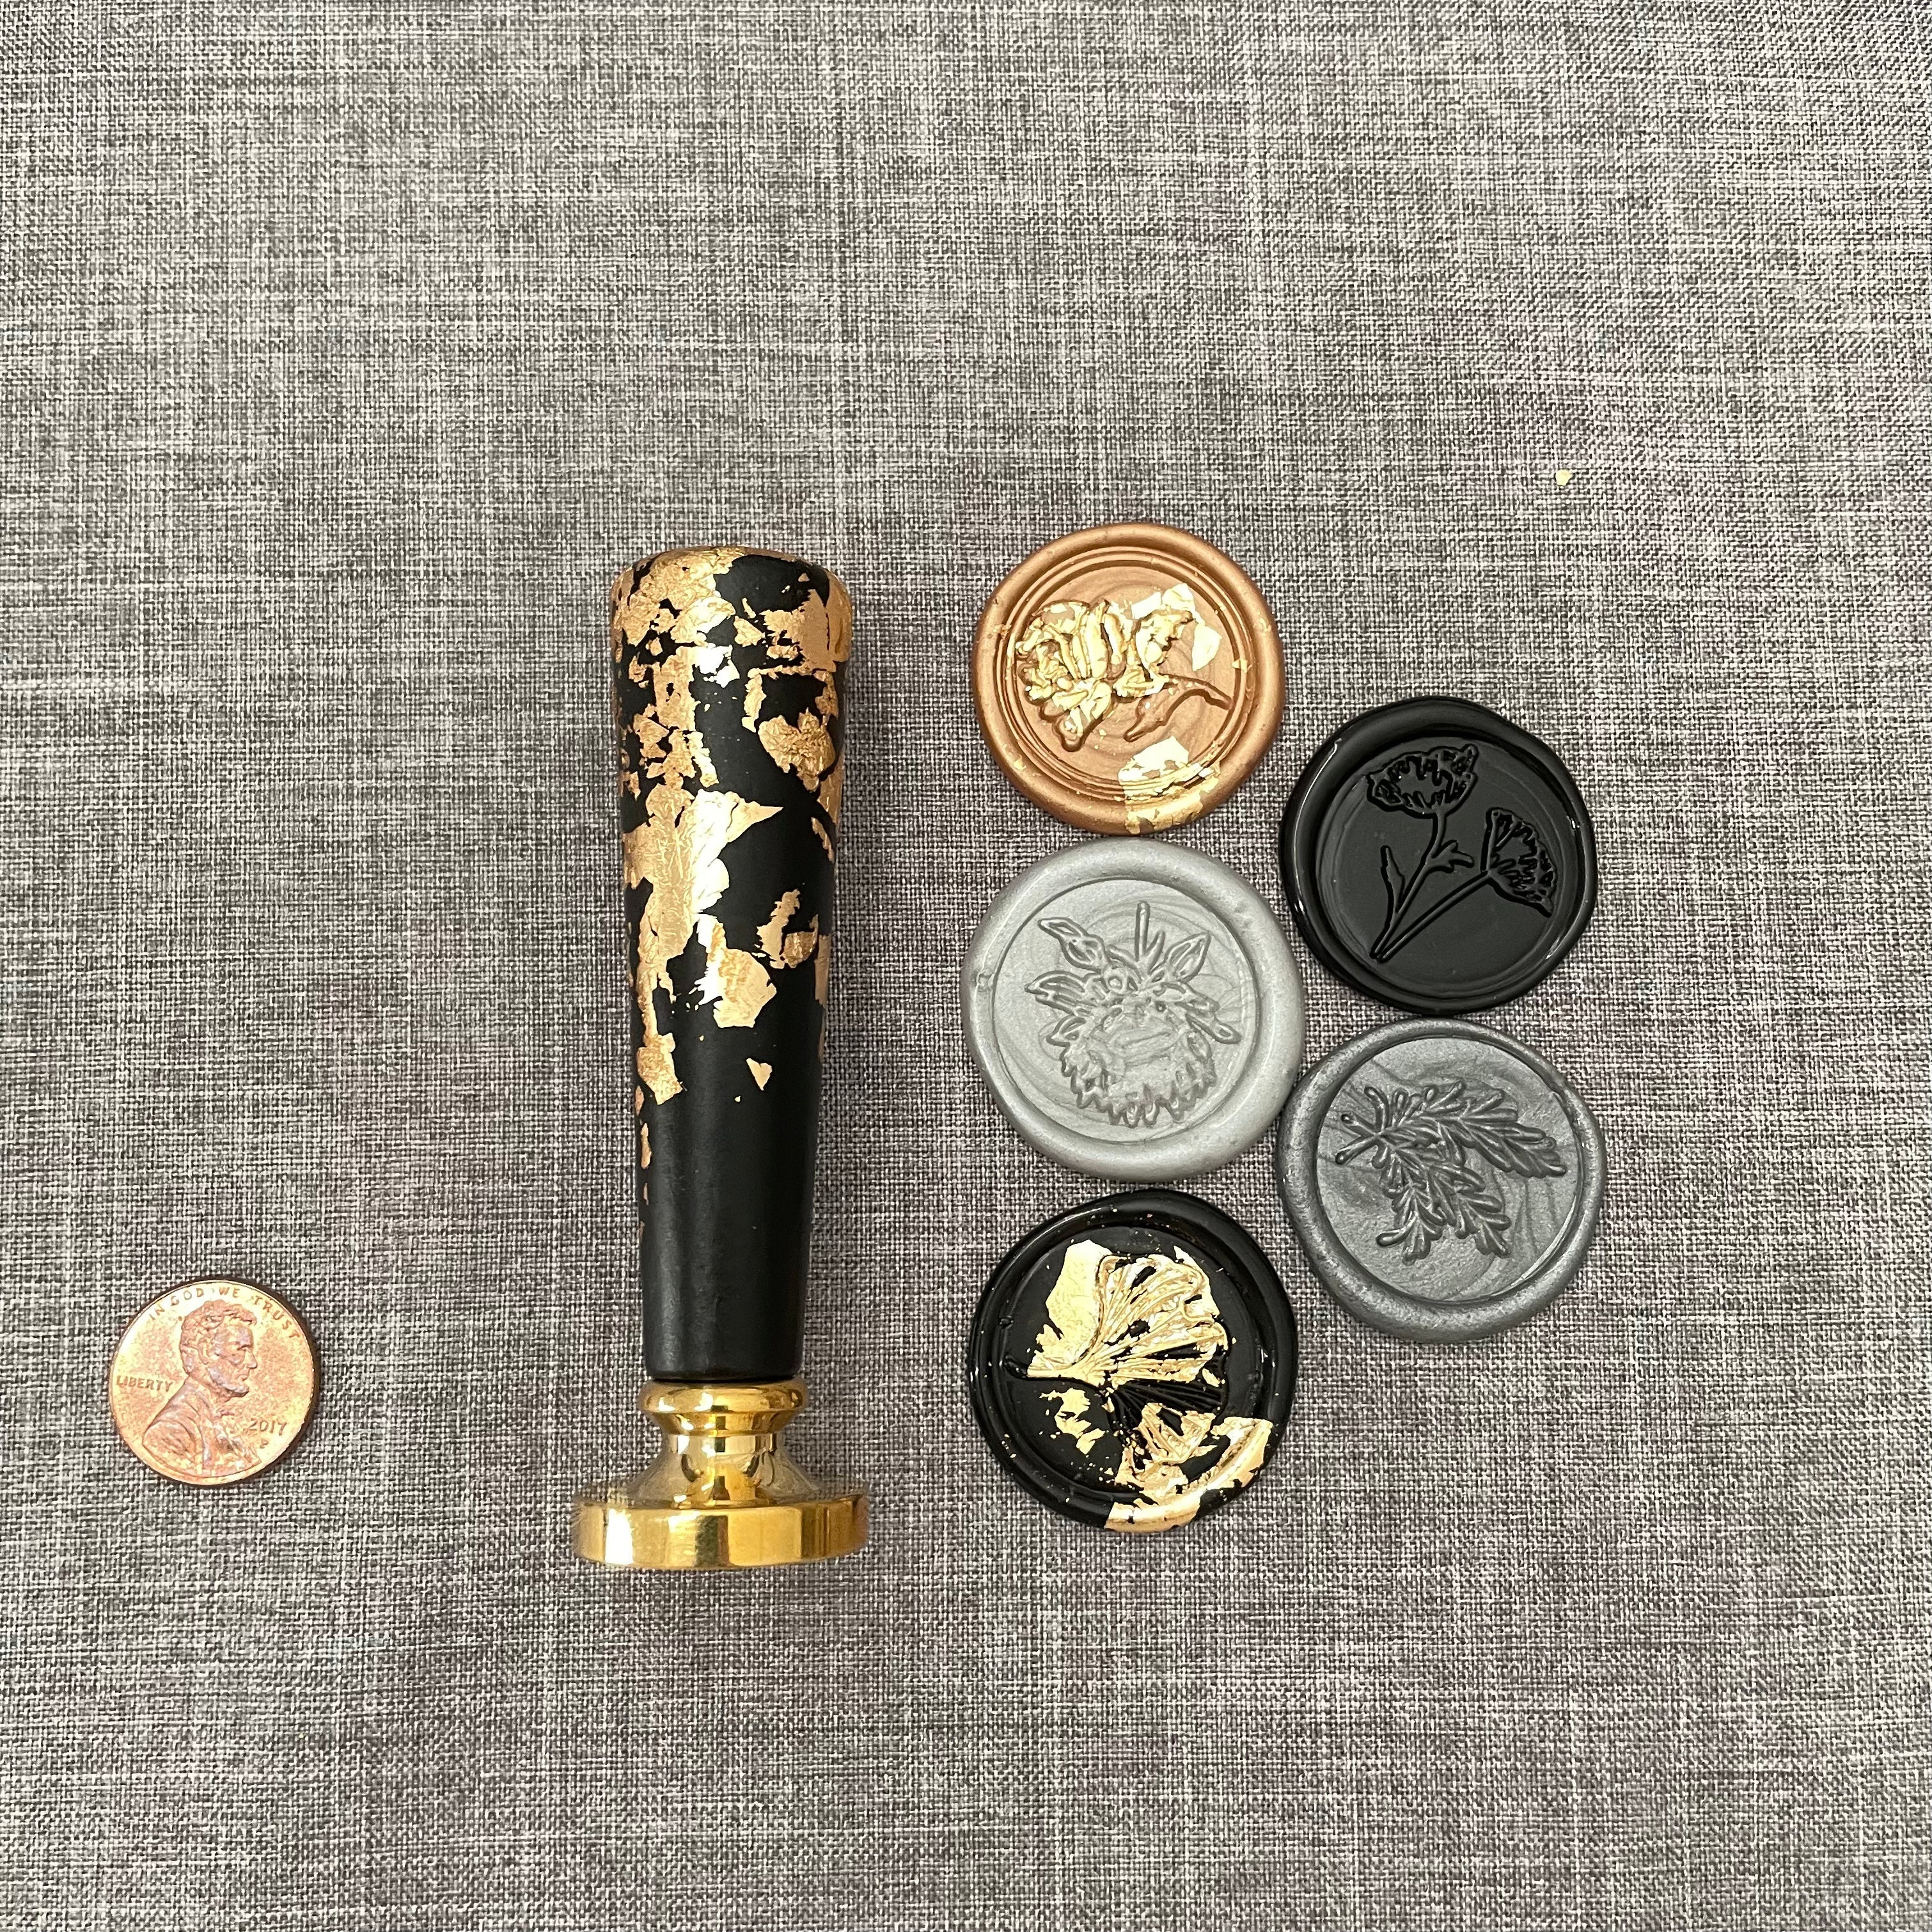 5 black, gold, and gray wax seals  with black and gold wax stamp with penny beside for size reference - Wedding Flat lay props from Champagne & GRIT